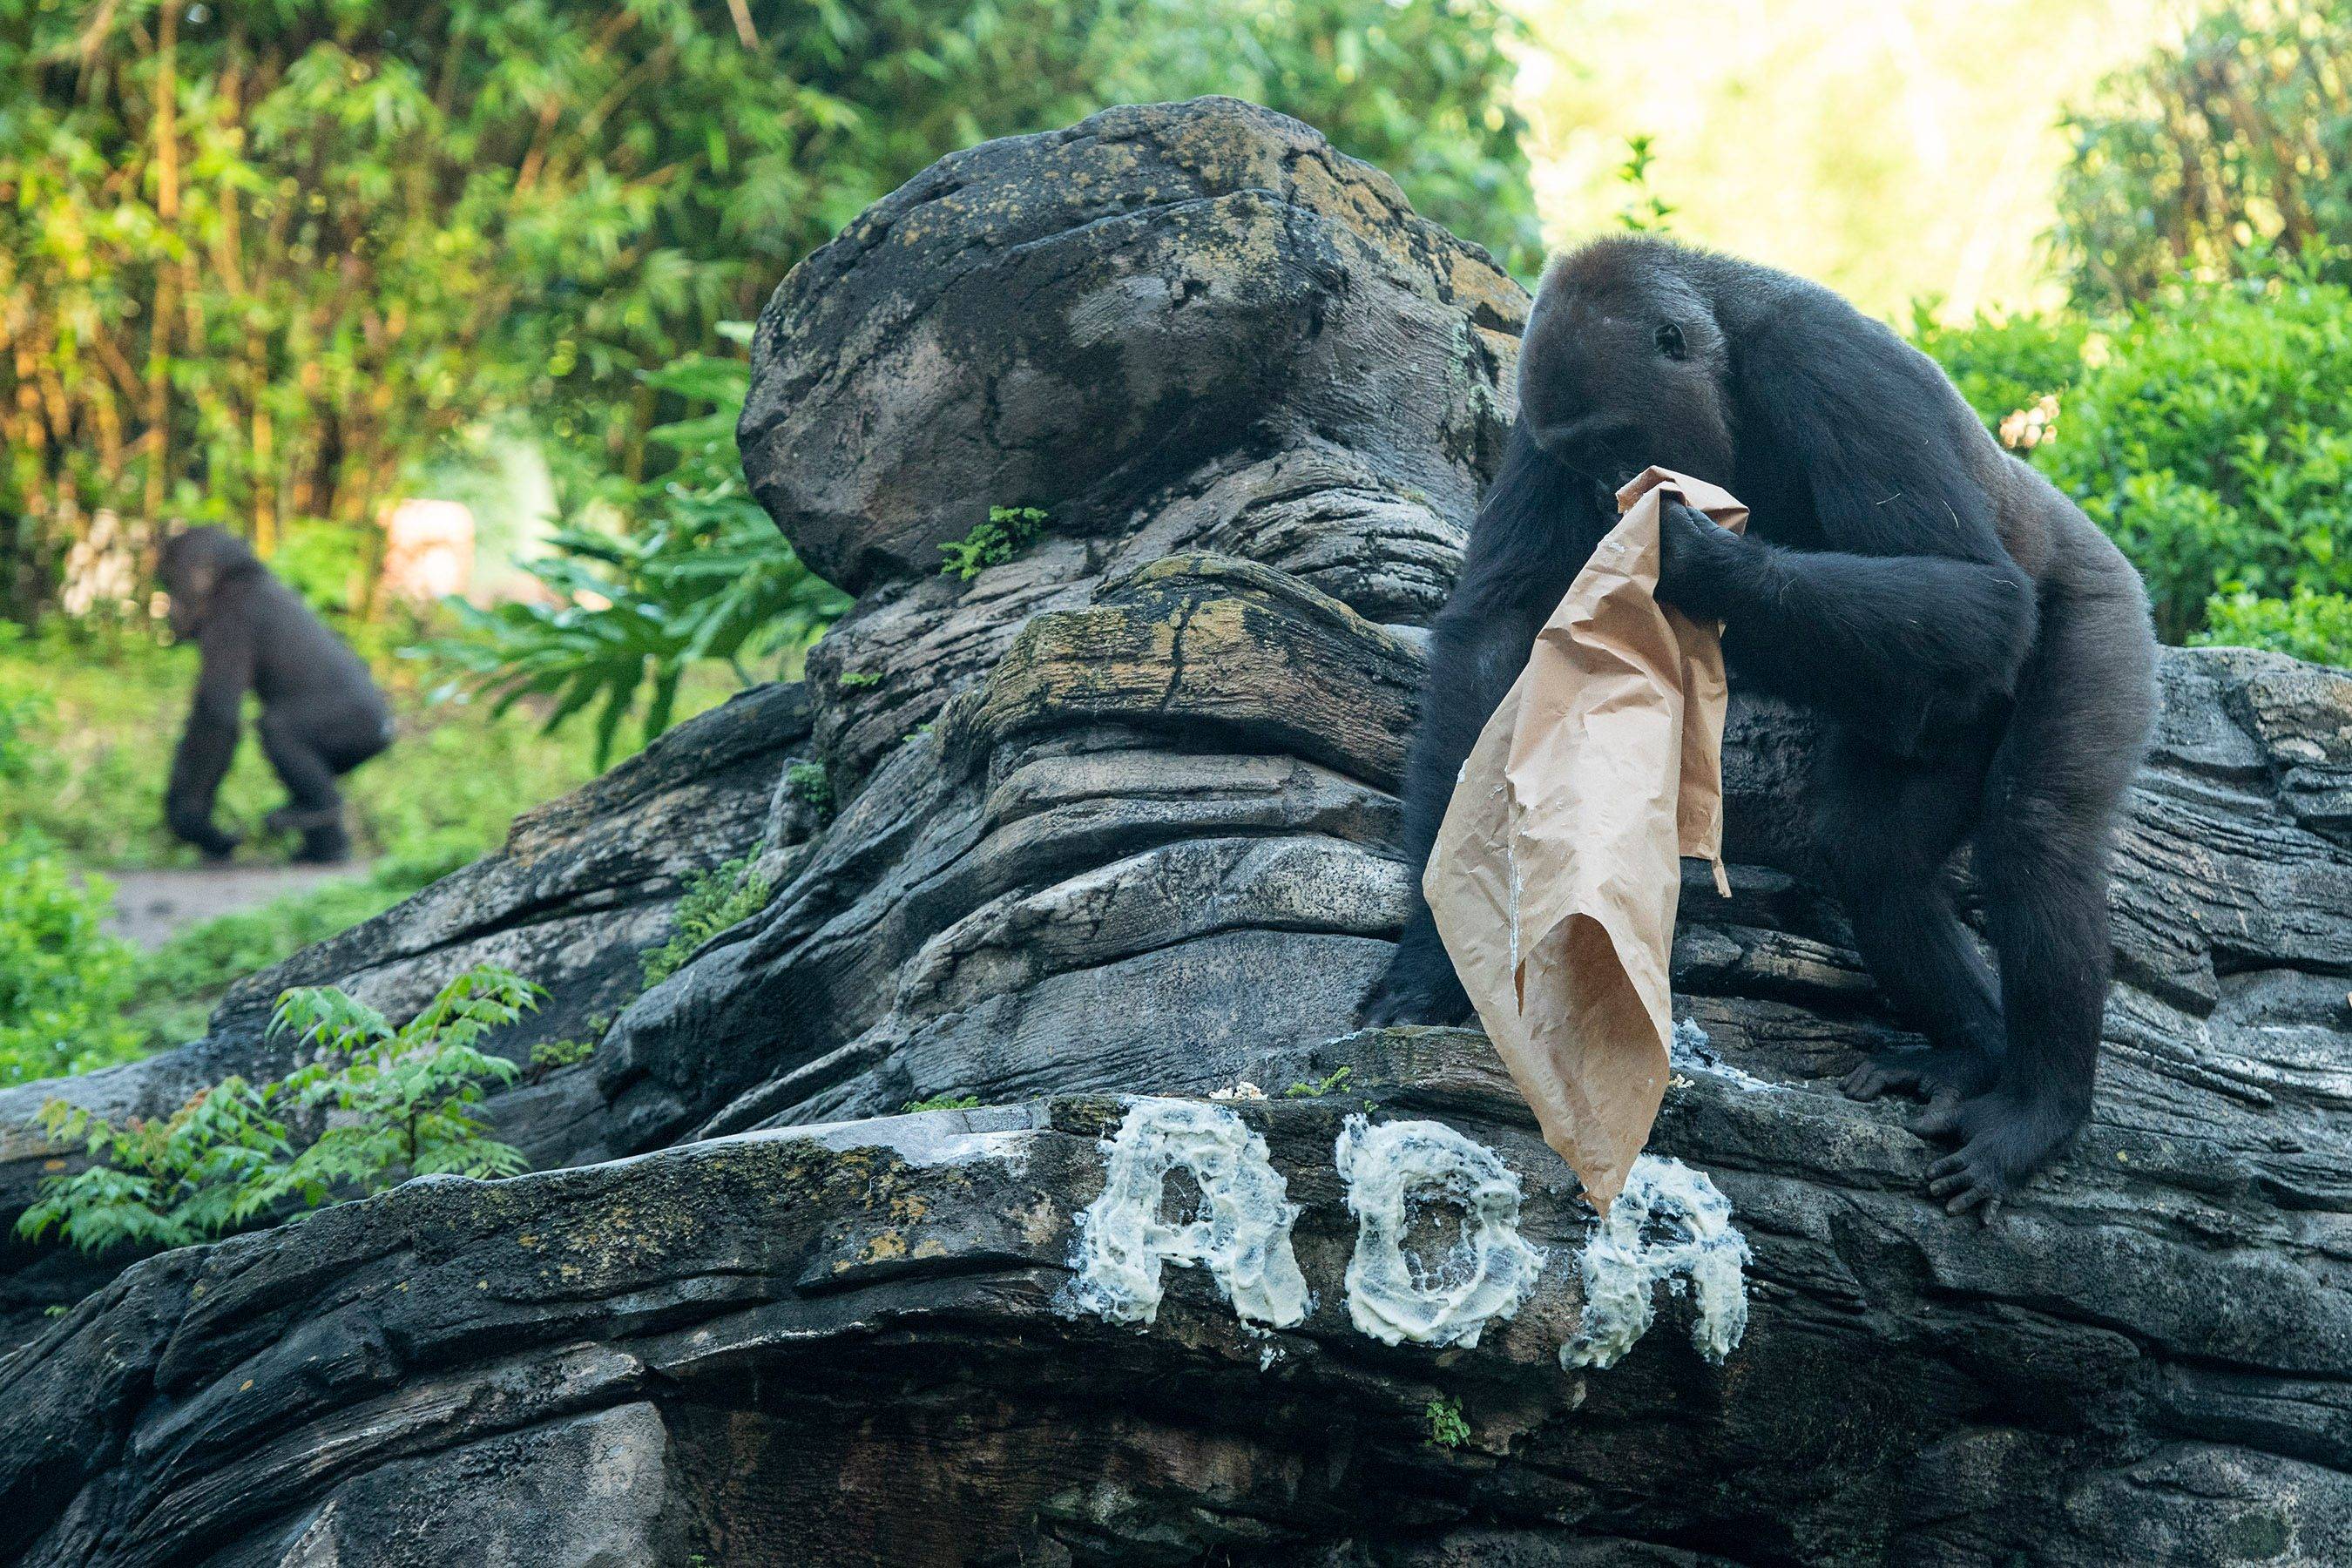 Gorillas at Disney's Animal Kingdom reveal the name of the newest western lowland gorilla to parents Azizi and Gino